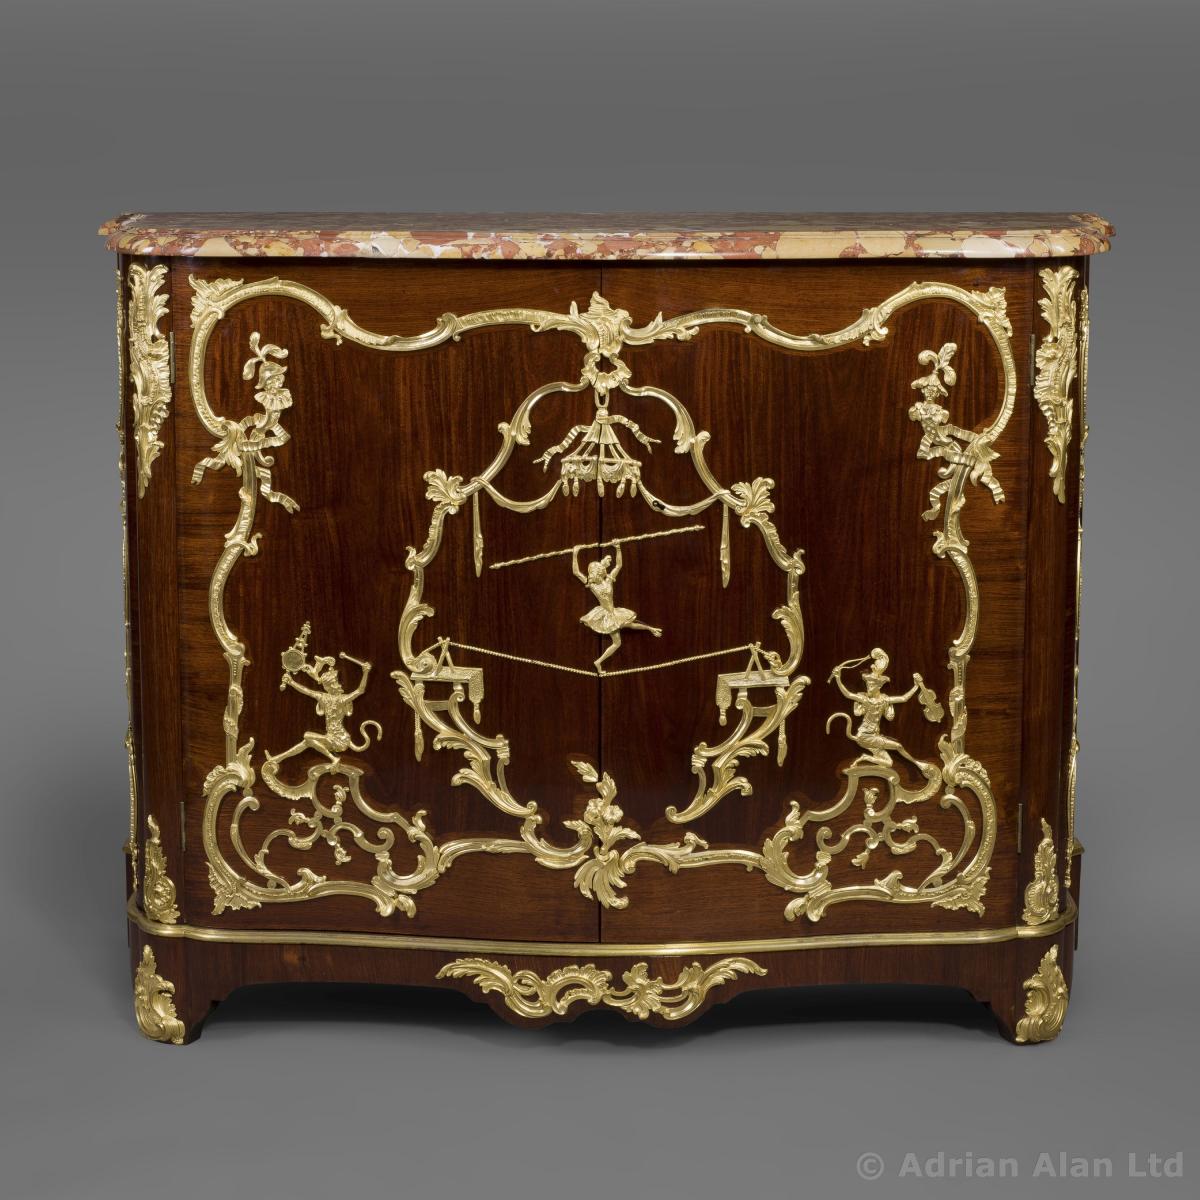 A Fine Louis XV Side-Cabinet Attributed to François Linke